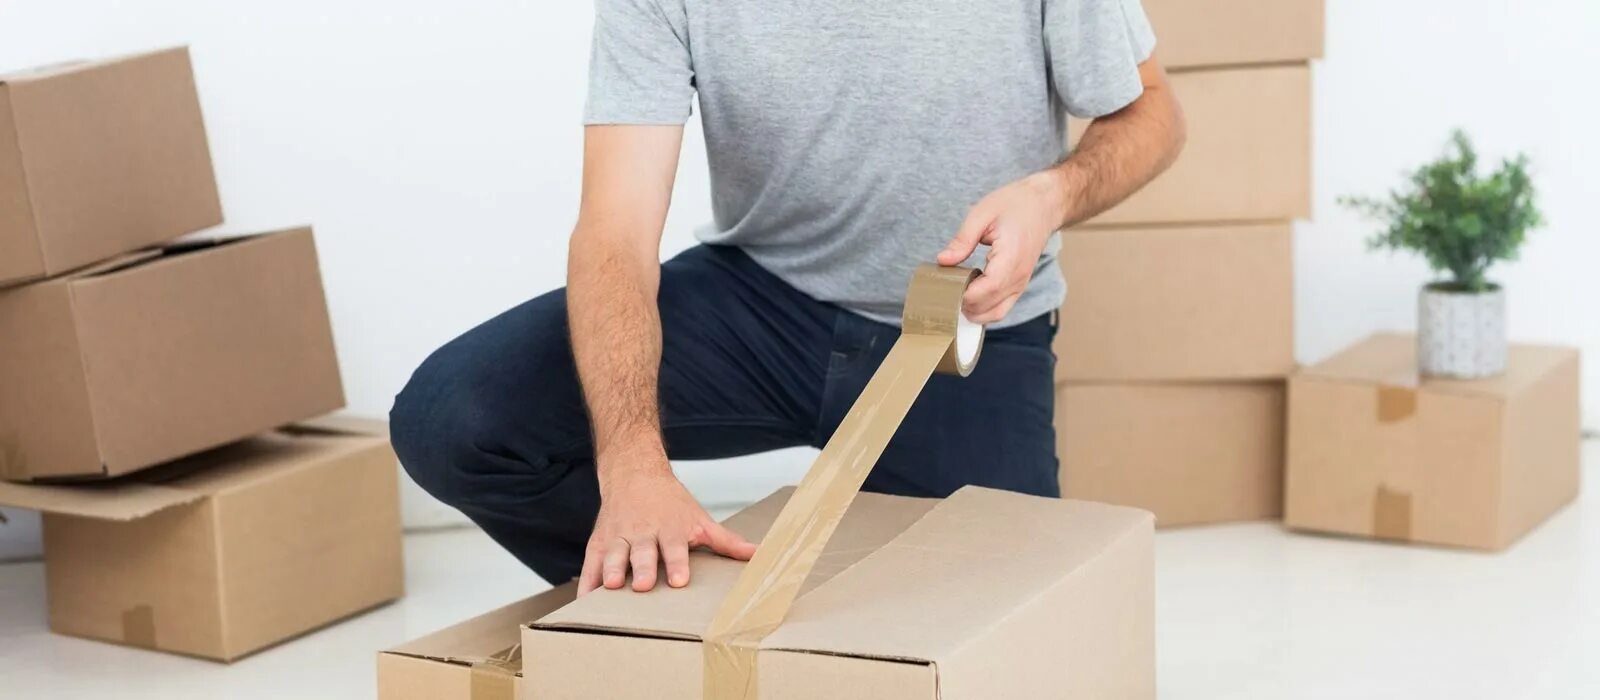 Move package. Упаковка дом. Professional Packers. Movers and Packers. Local Packers and Movers near me.